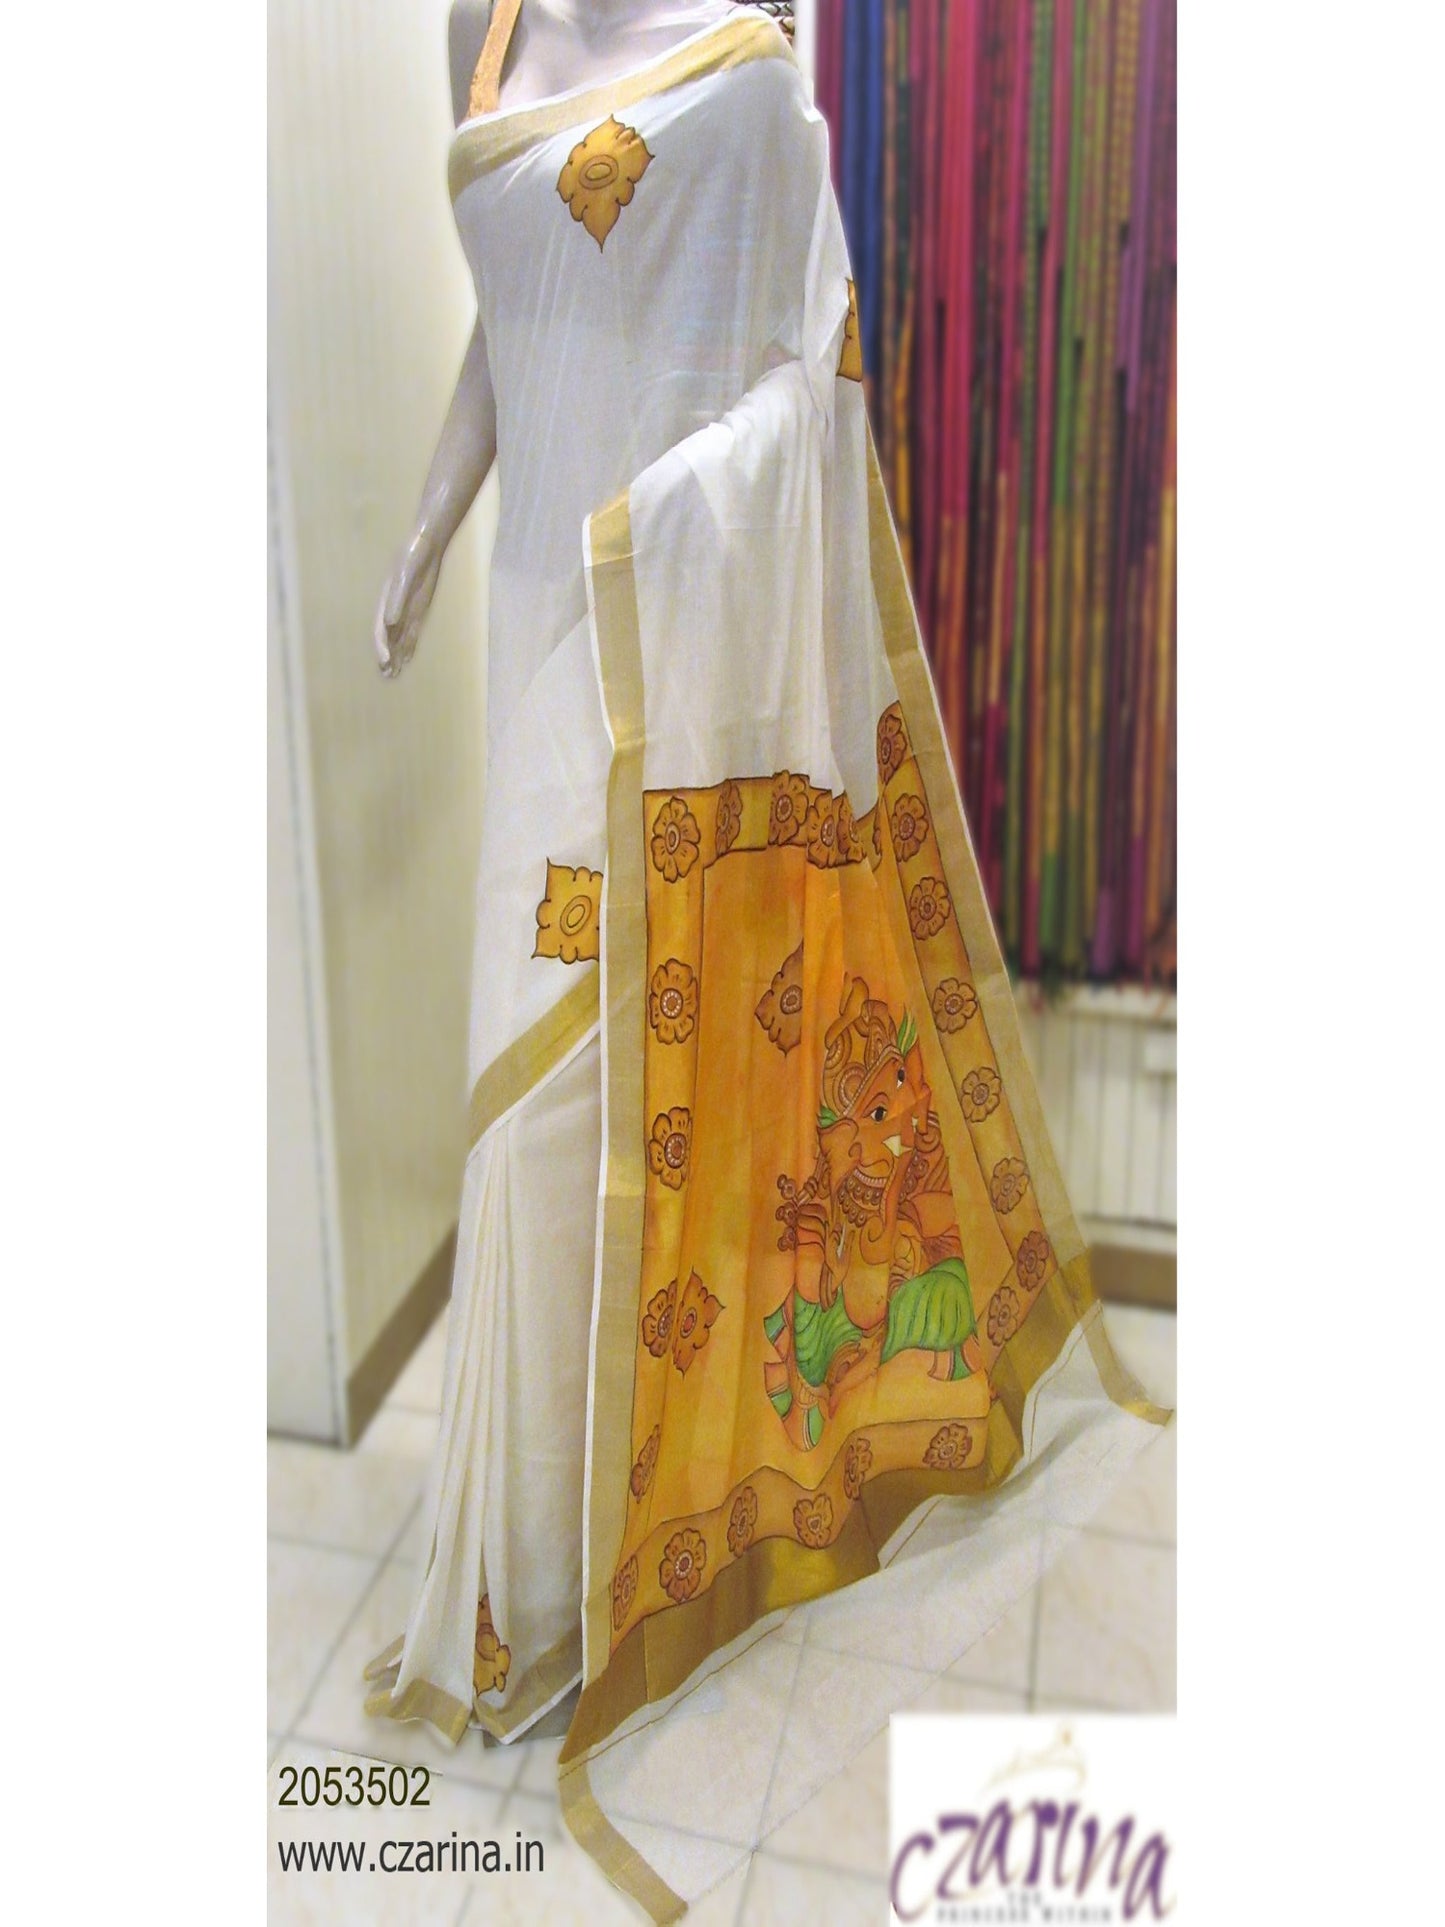 OFF WHITE AND MUSTARD MURAL PAINTED COTTON KERALA SAREE